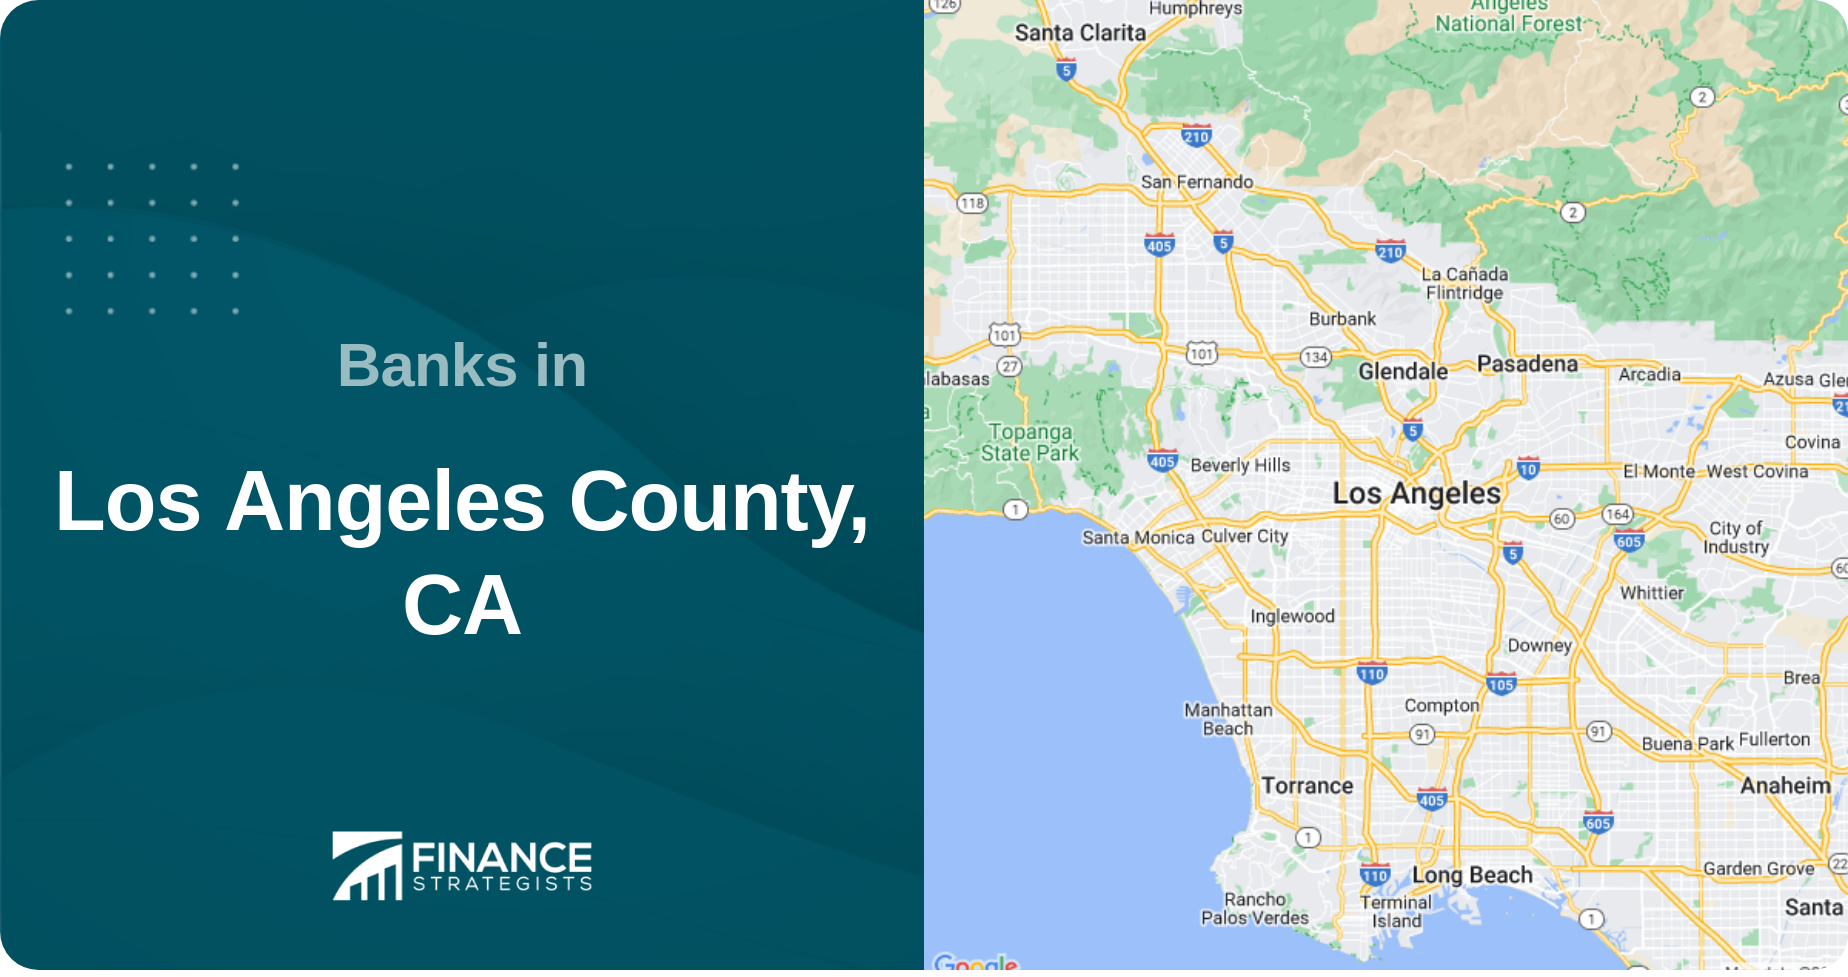 Banks in Los Angeles County, CA